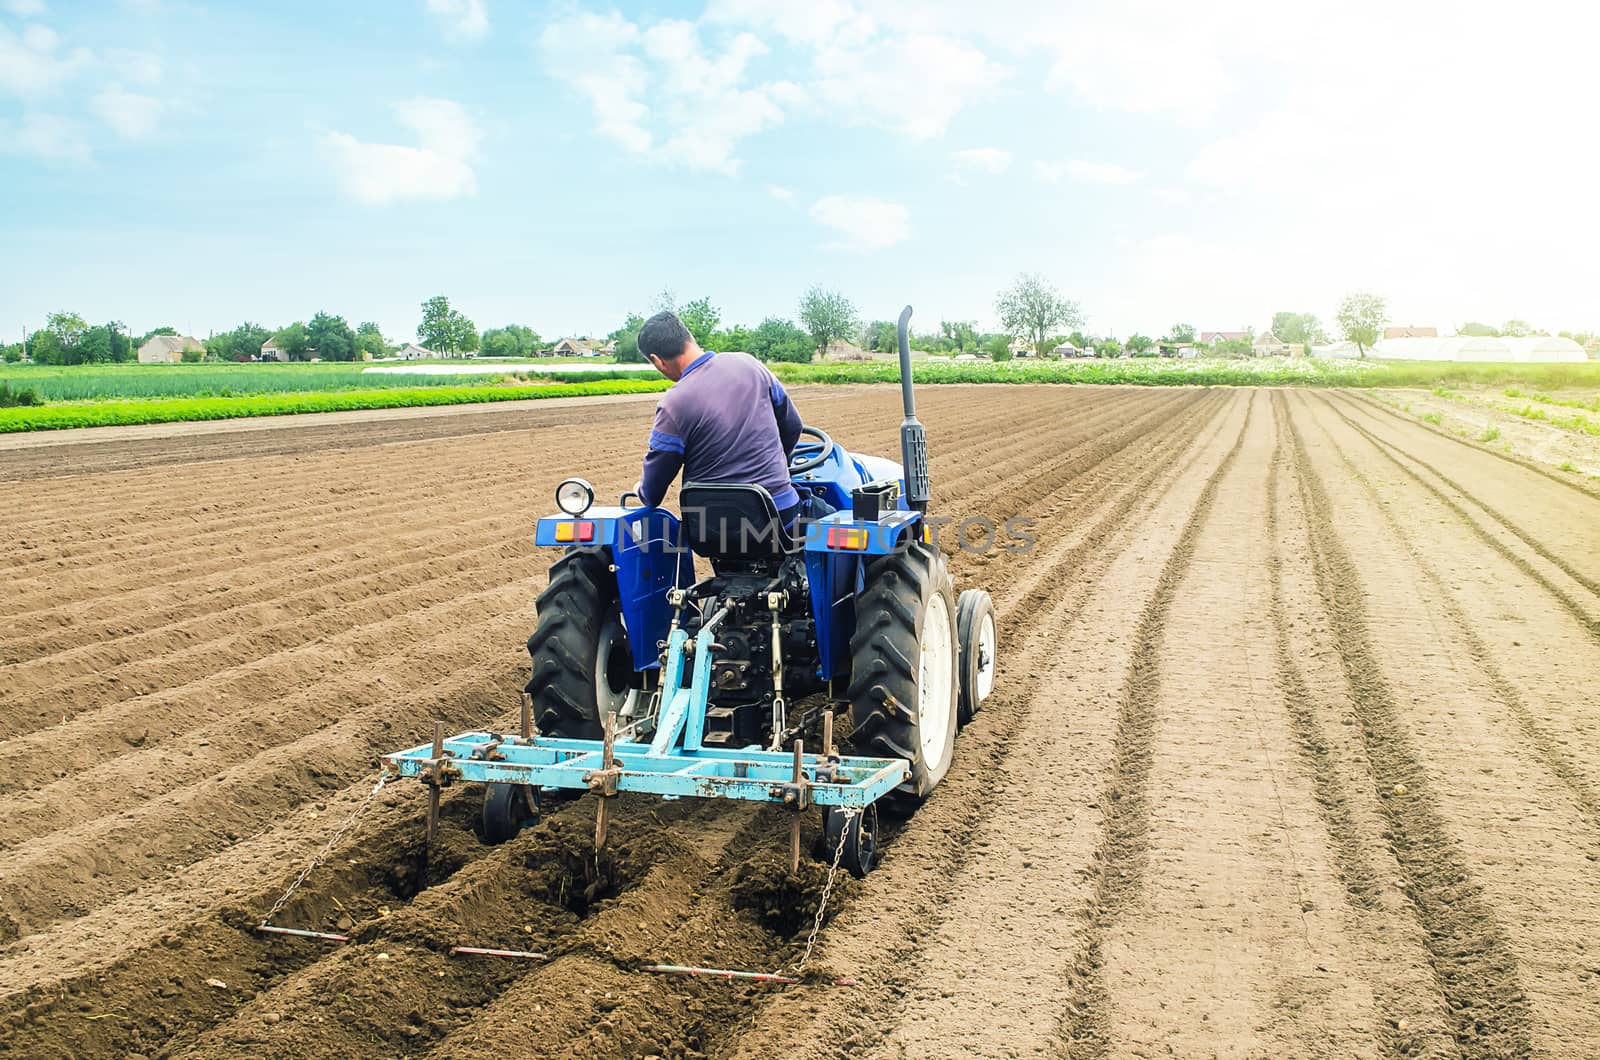 Farmer on a tractor making rows on a farm field. Preparing the land for planting future crop plants. Cultivation of soil for planting. Agroindustry, agribusiness. Farming, farmland.